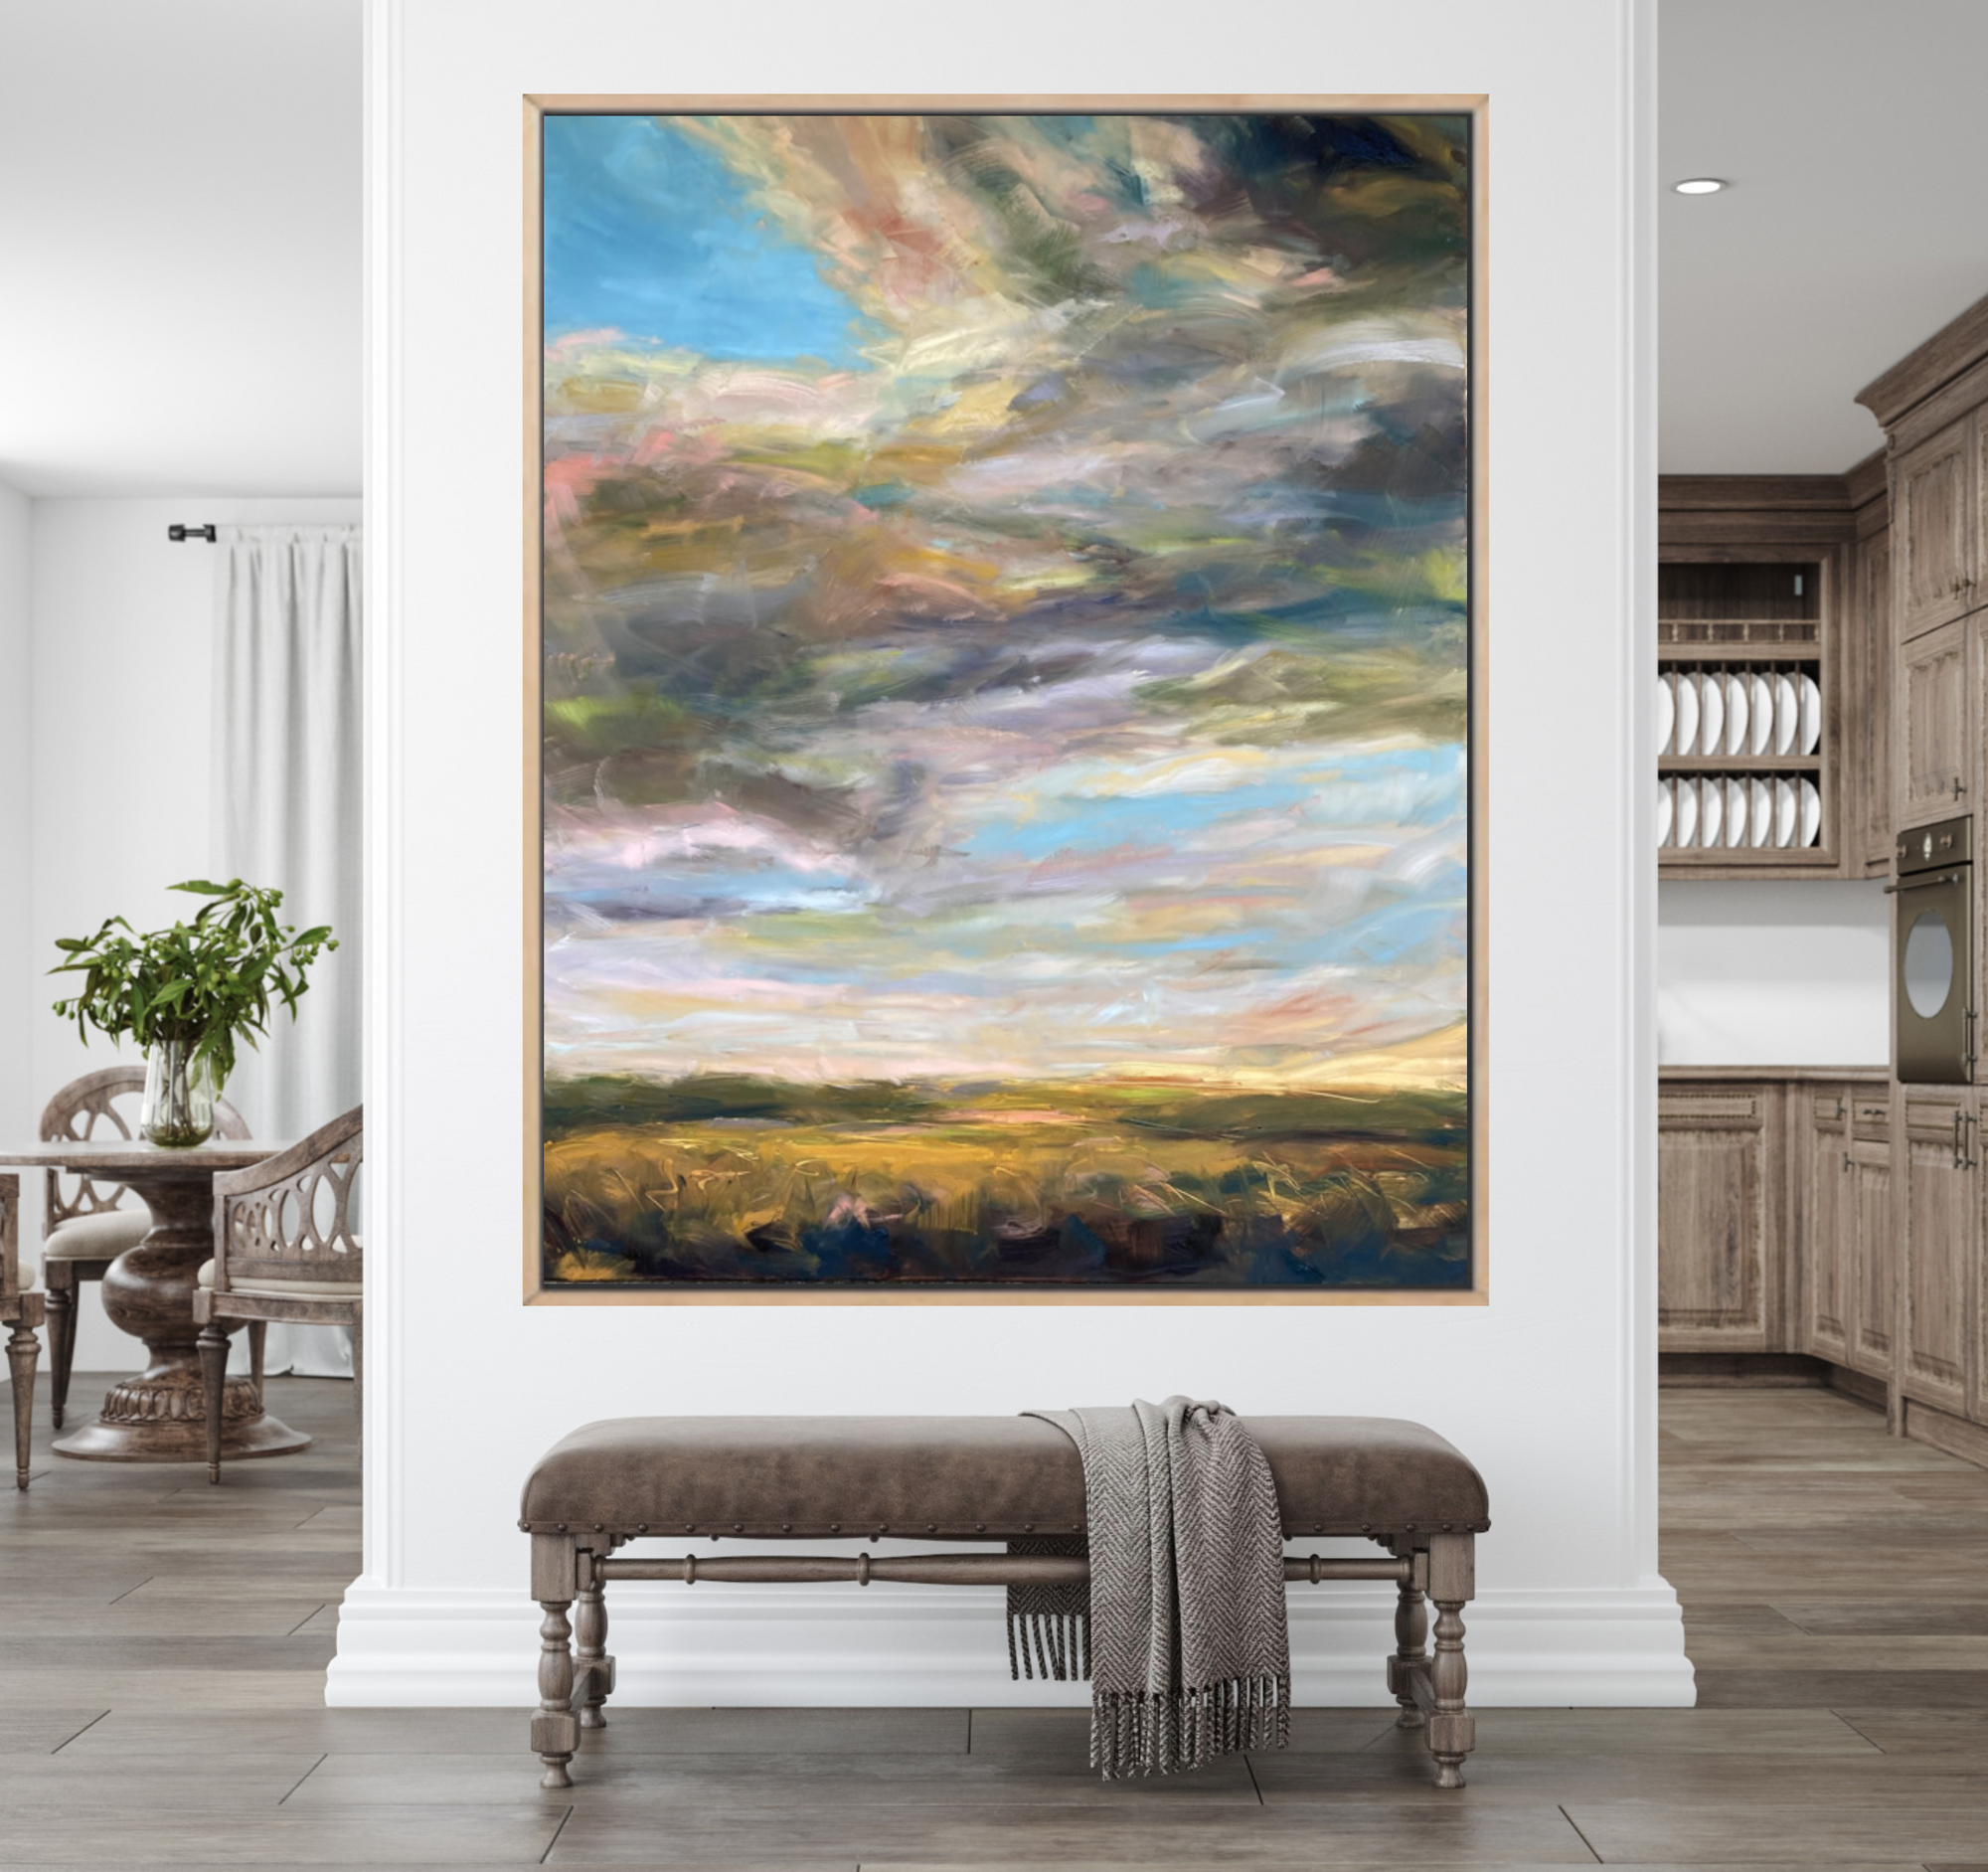 Once Upon A Dream Original Oil Landscape Painting In Room Setting 1